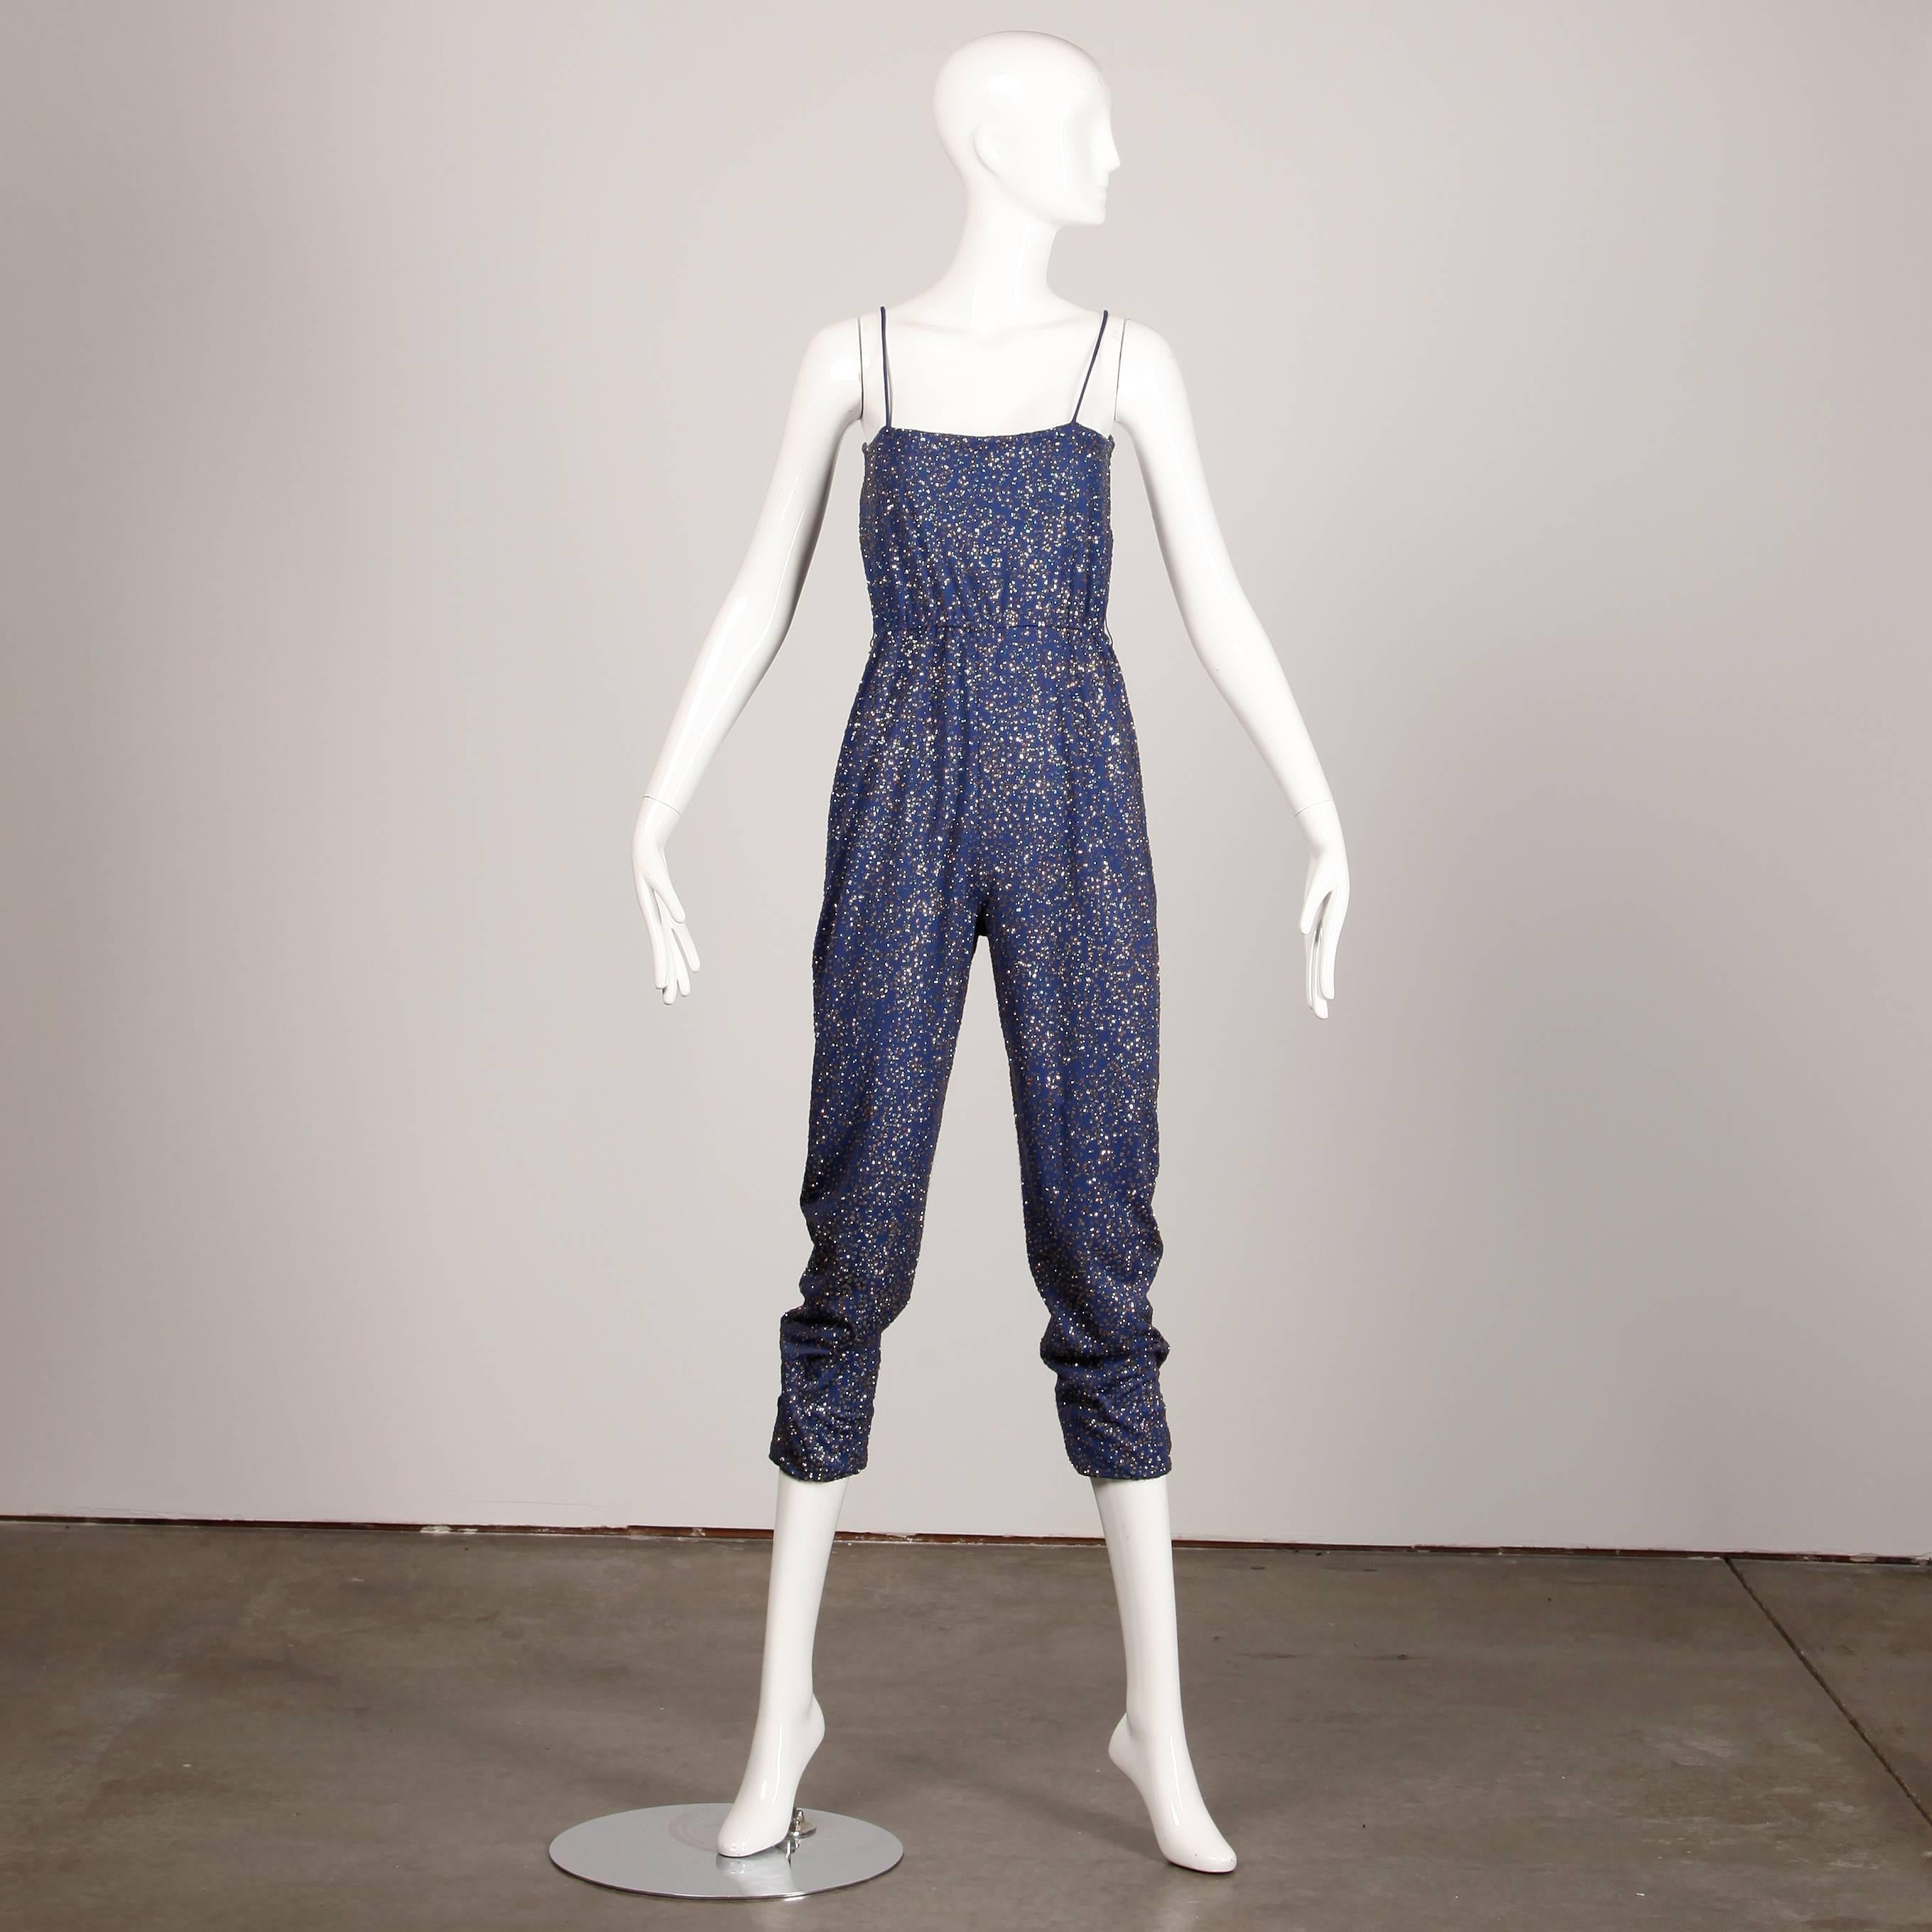 Fantastic vintage blue jersey knit jumpsuit by Pat Richards with allover sparkly glitter sequins. Cropped leg and spaghetti straps. Belt loops but no belt included.

Details: 

Unlined
Marked Size: 8
Estimated Size: Small
Color: Blue/